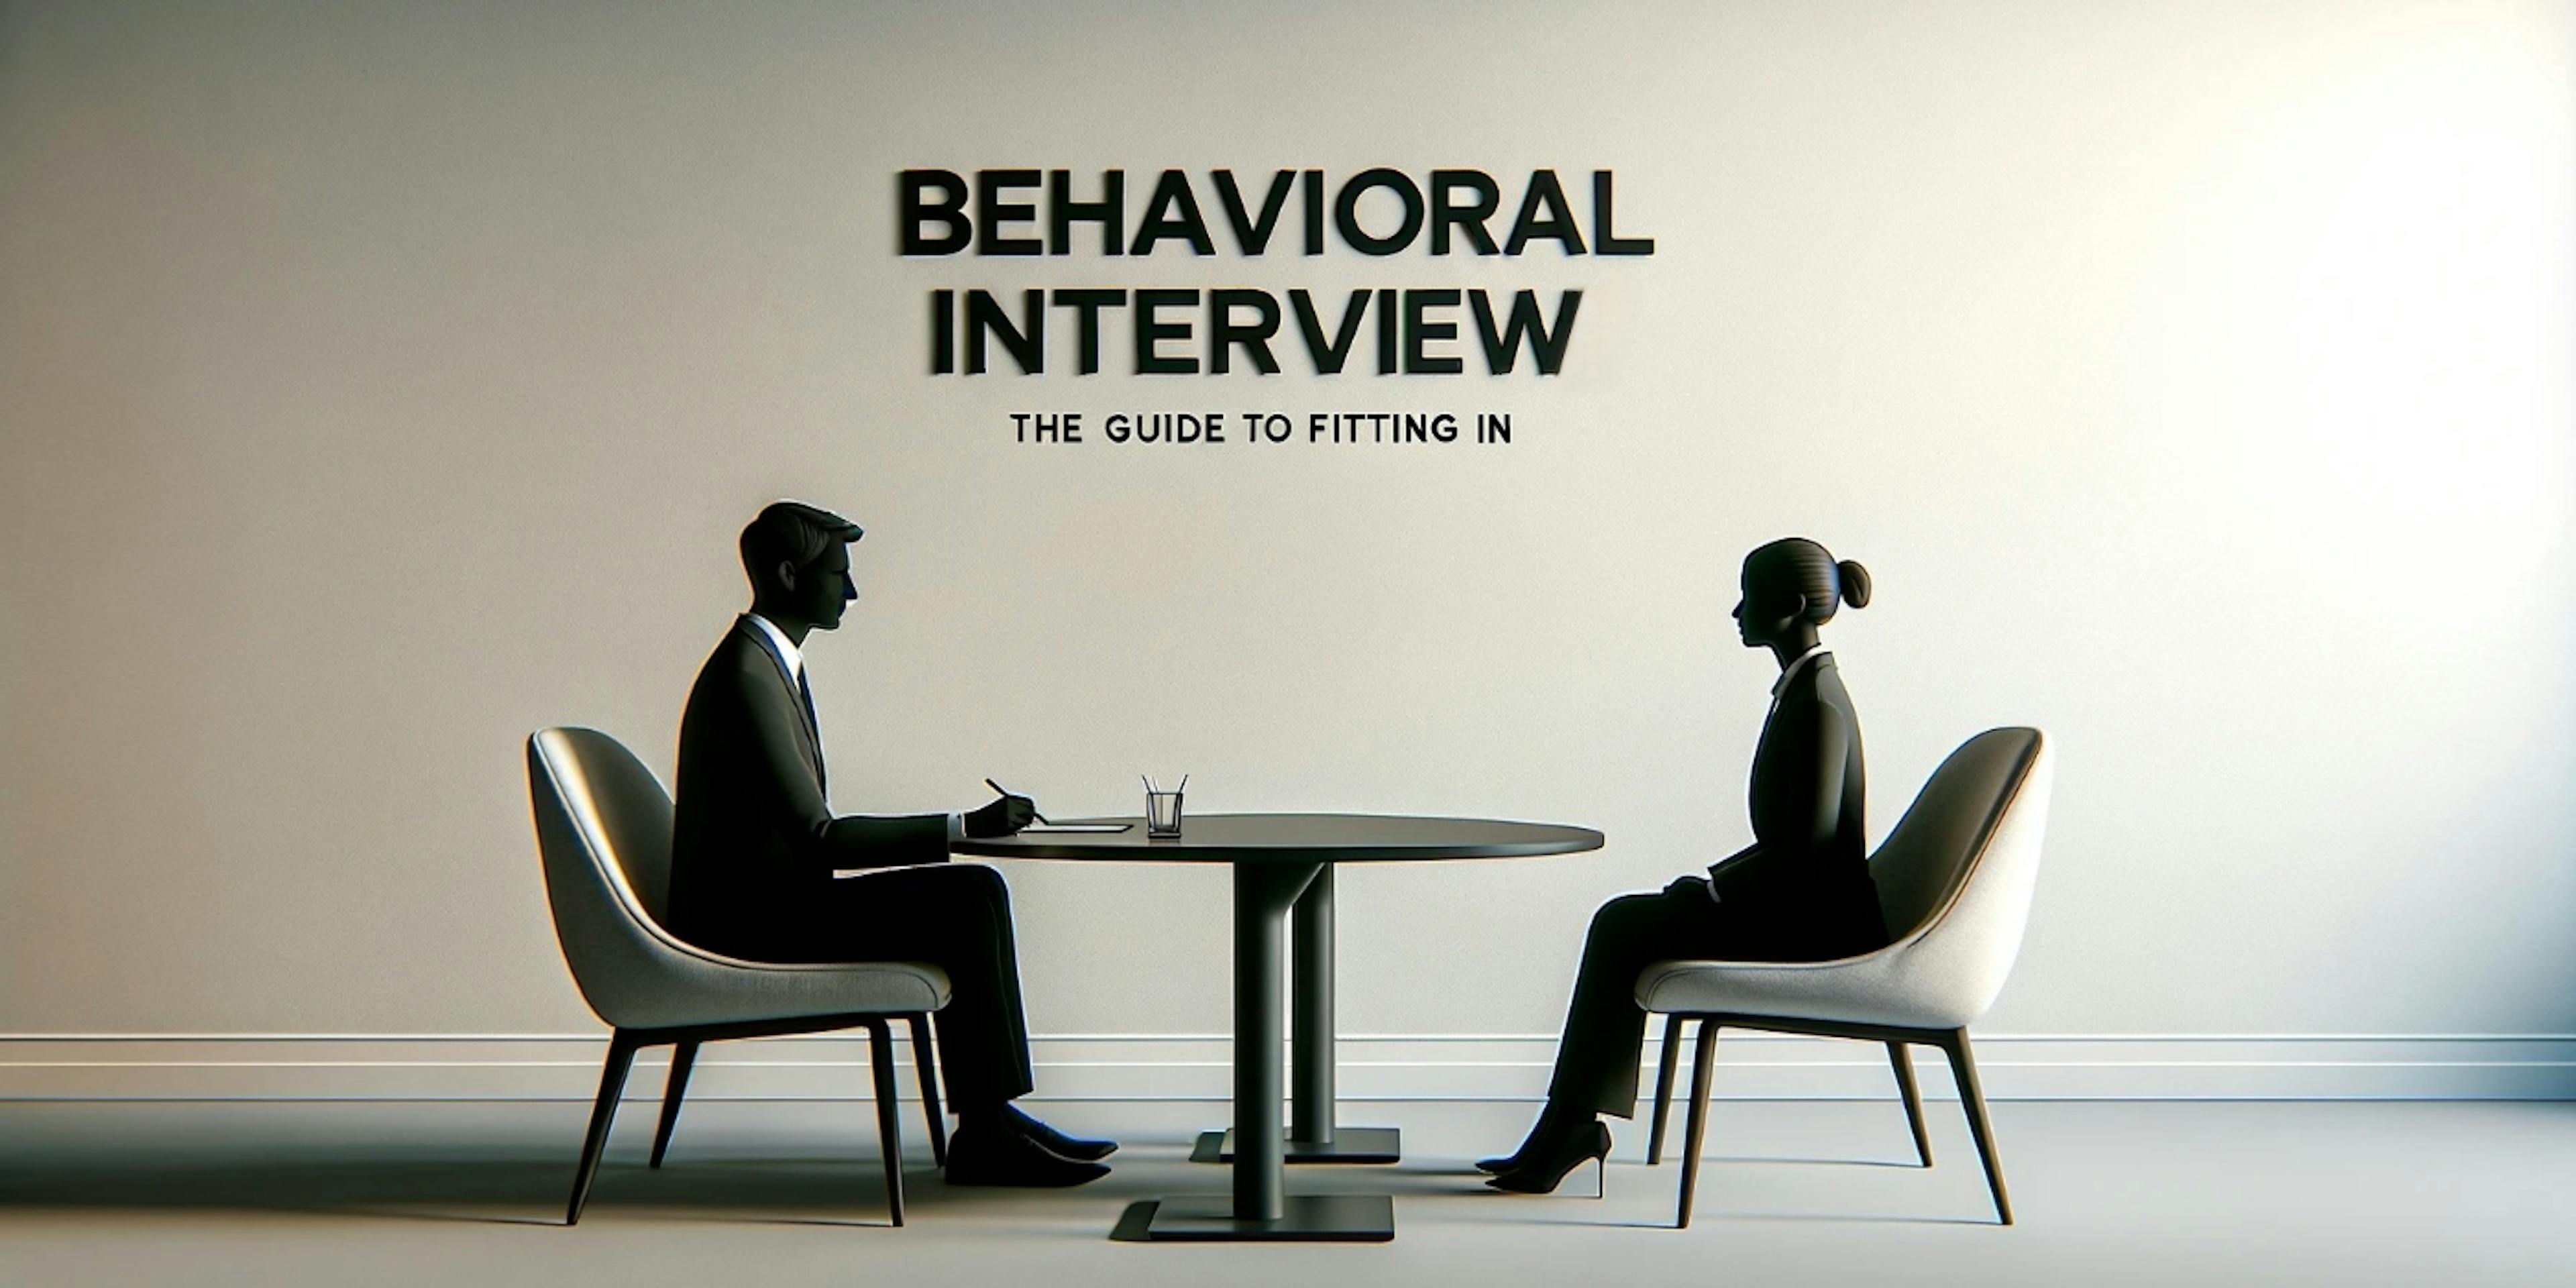 featured image - Behavioral Interview: The Guide to Fitting In